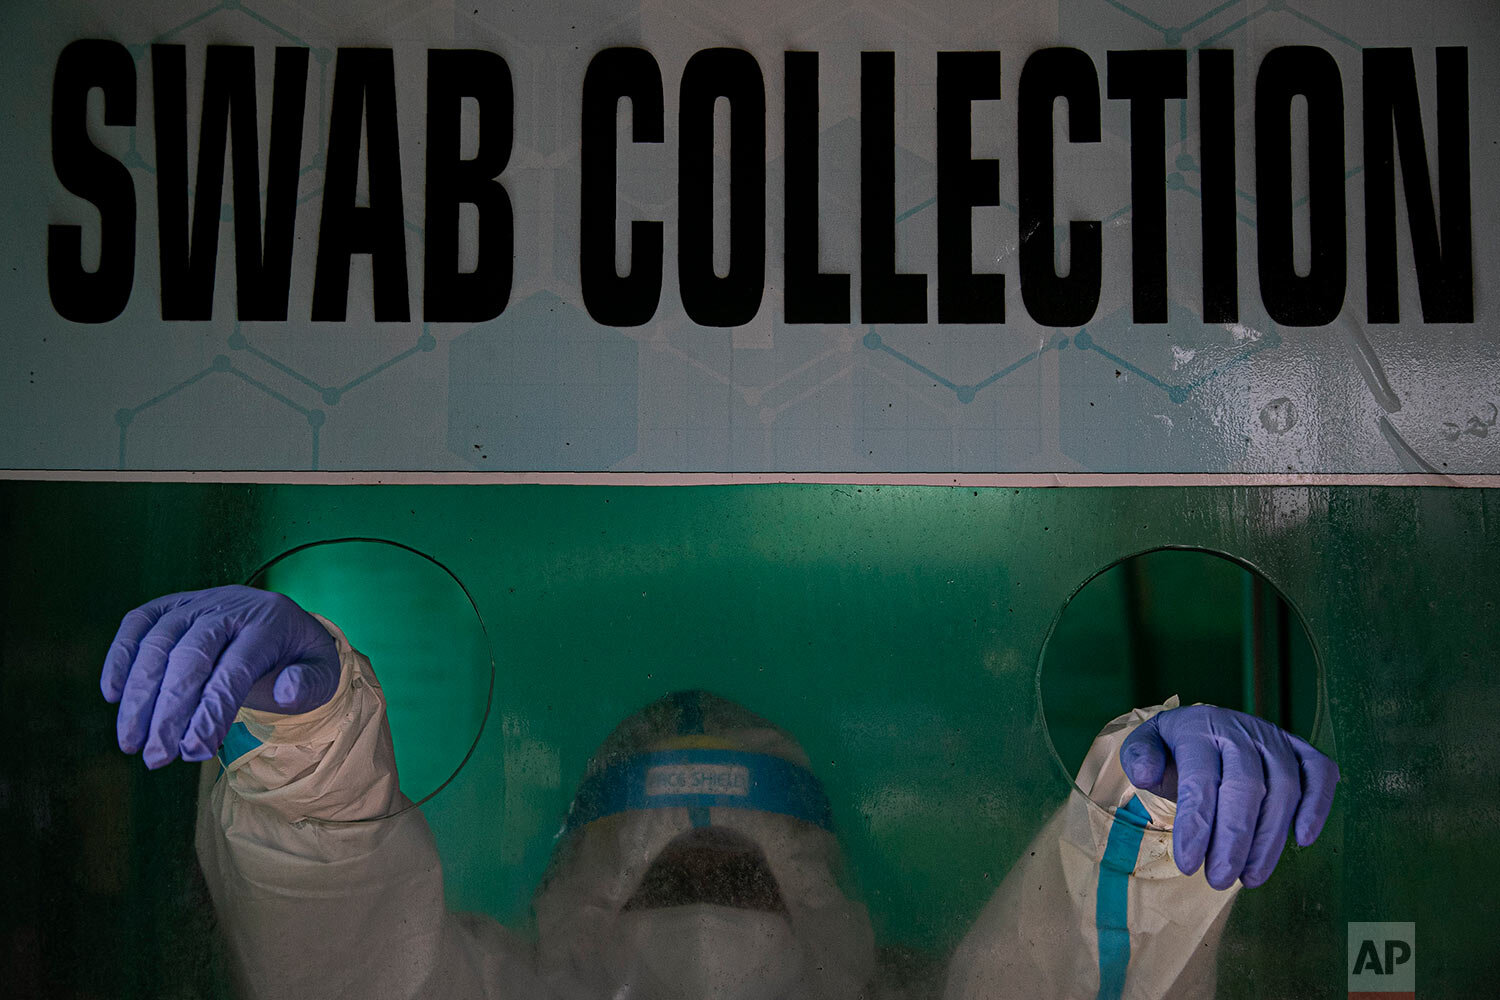  An Indian health worker waits to take a nasal swab sample to test for COVID-19 in a swab collection center in Gauhati, India, Monday, Aug. 17, 2020. (AP Photo/Anupam Nath) 